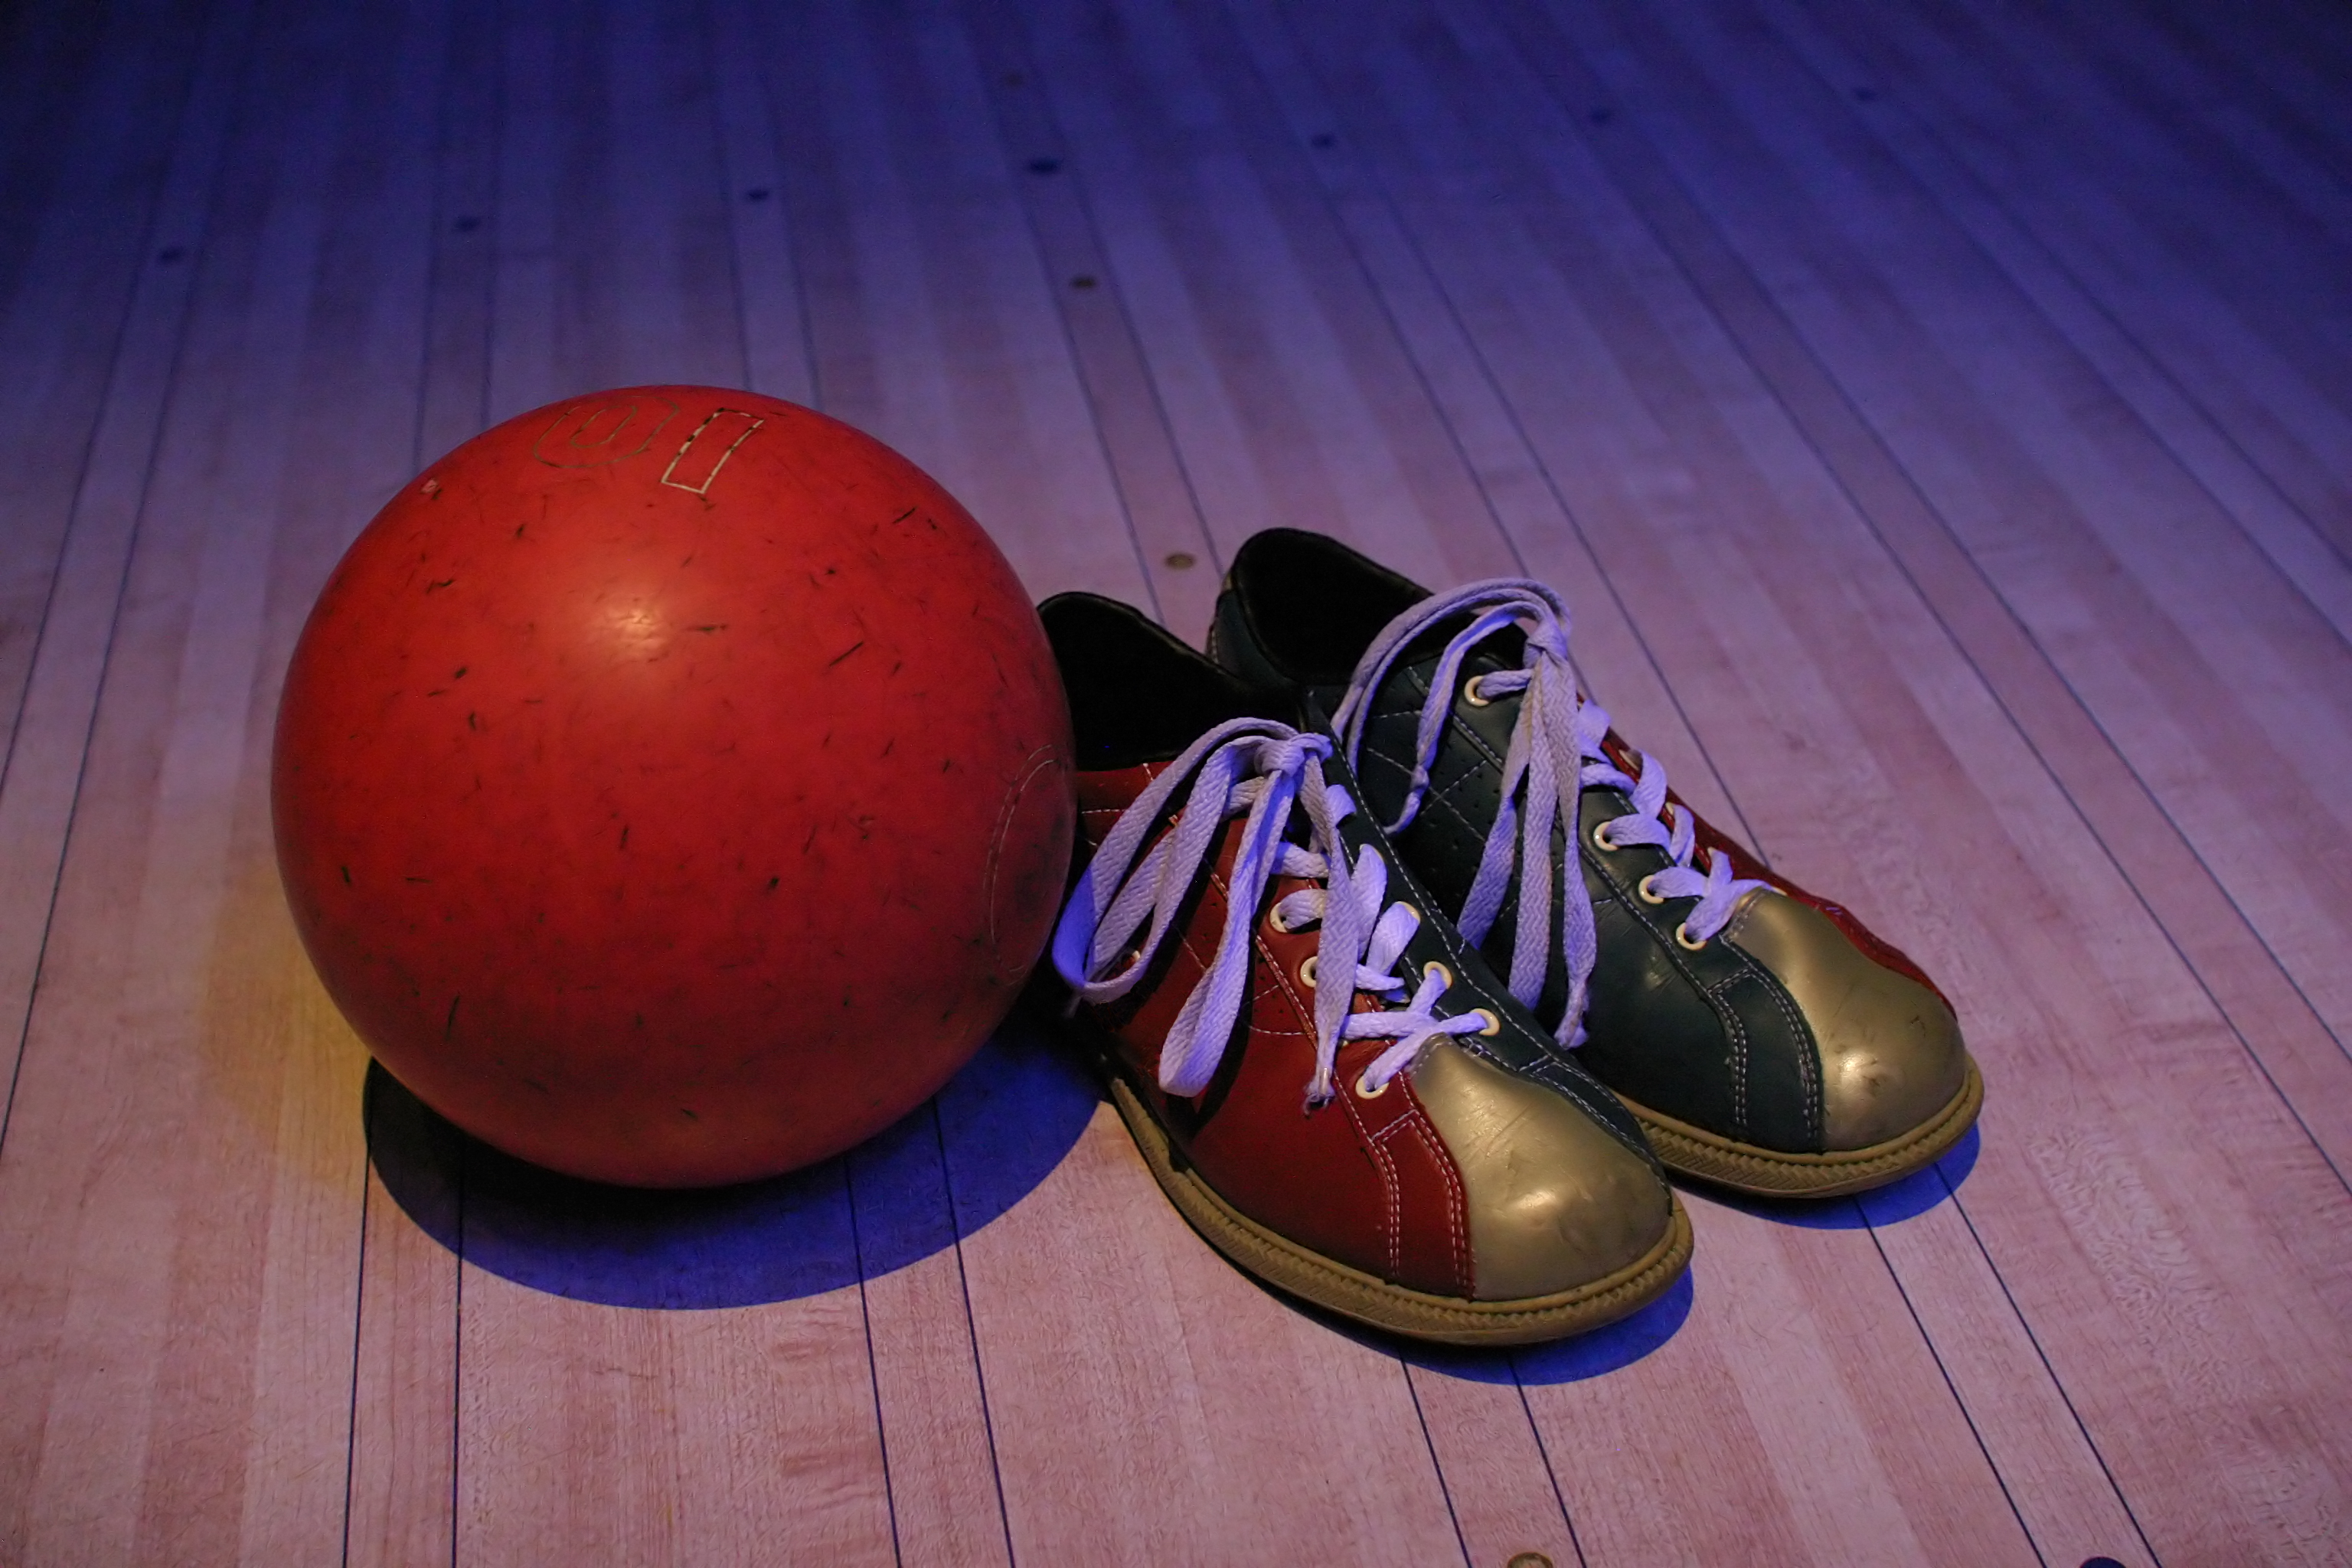 Free bowling event for families on 4/20